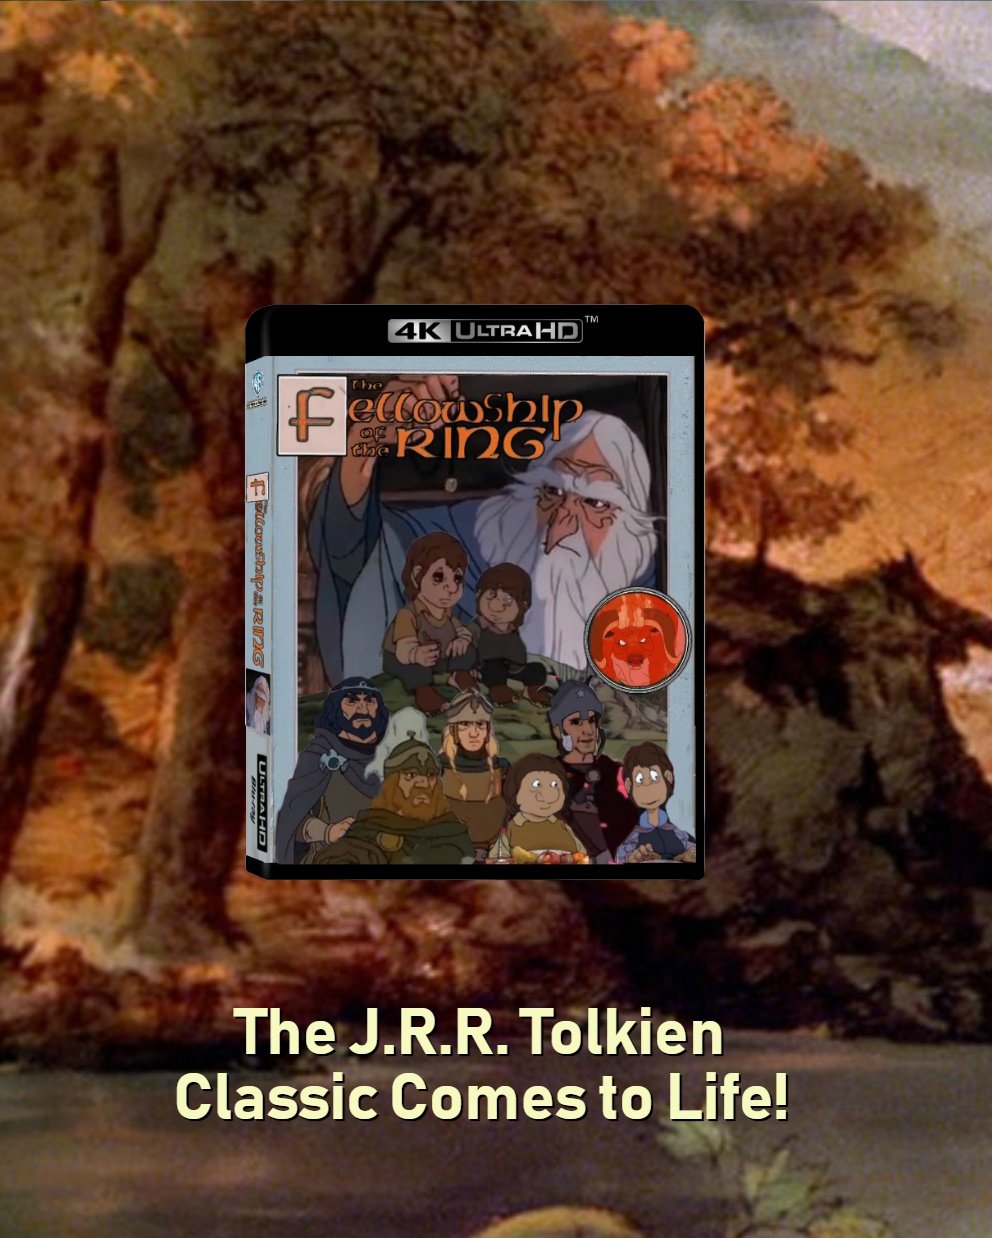 The Fellowship of the Ring box cover